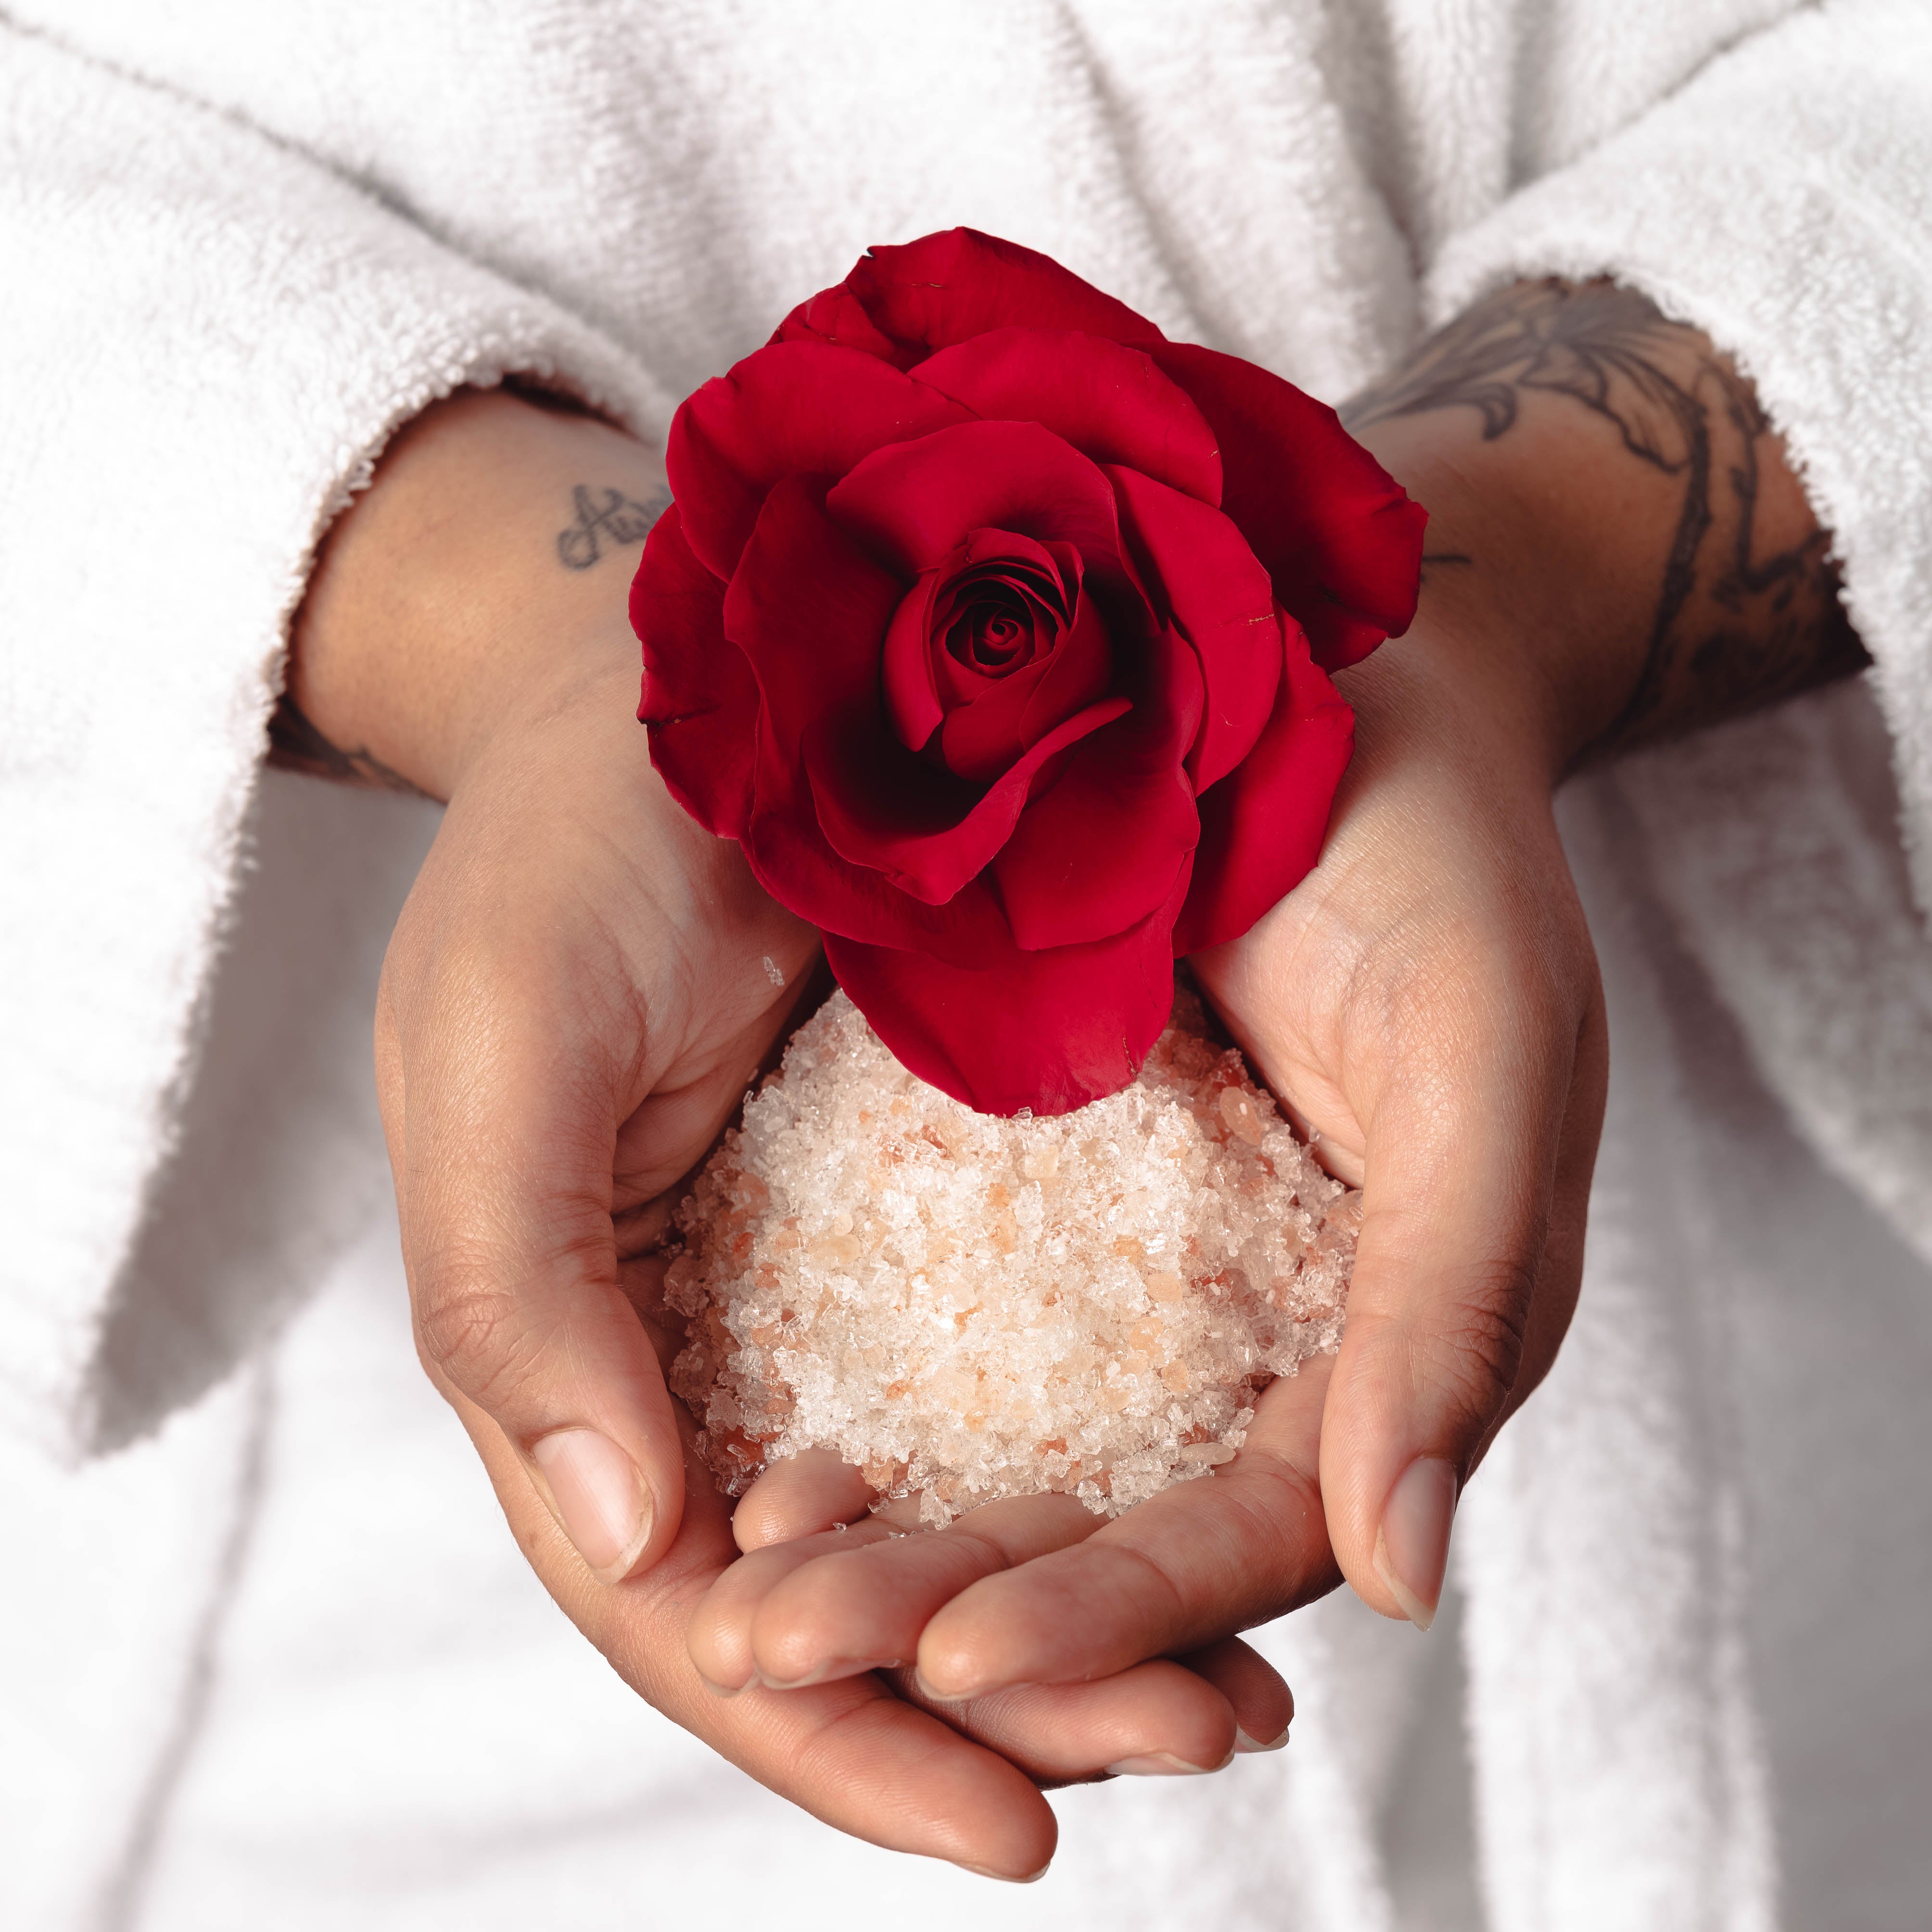 Rose Petals for a serene bath experience